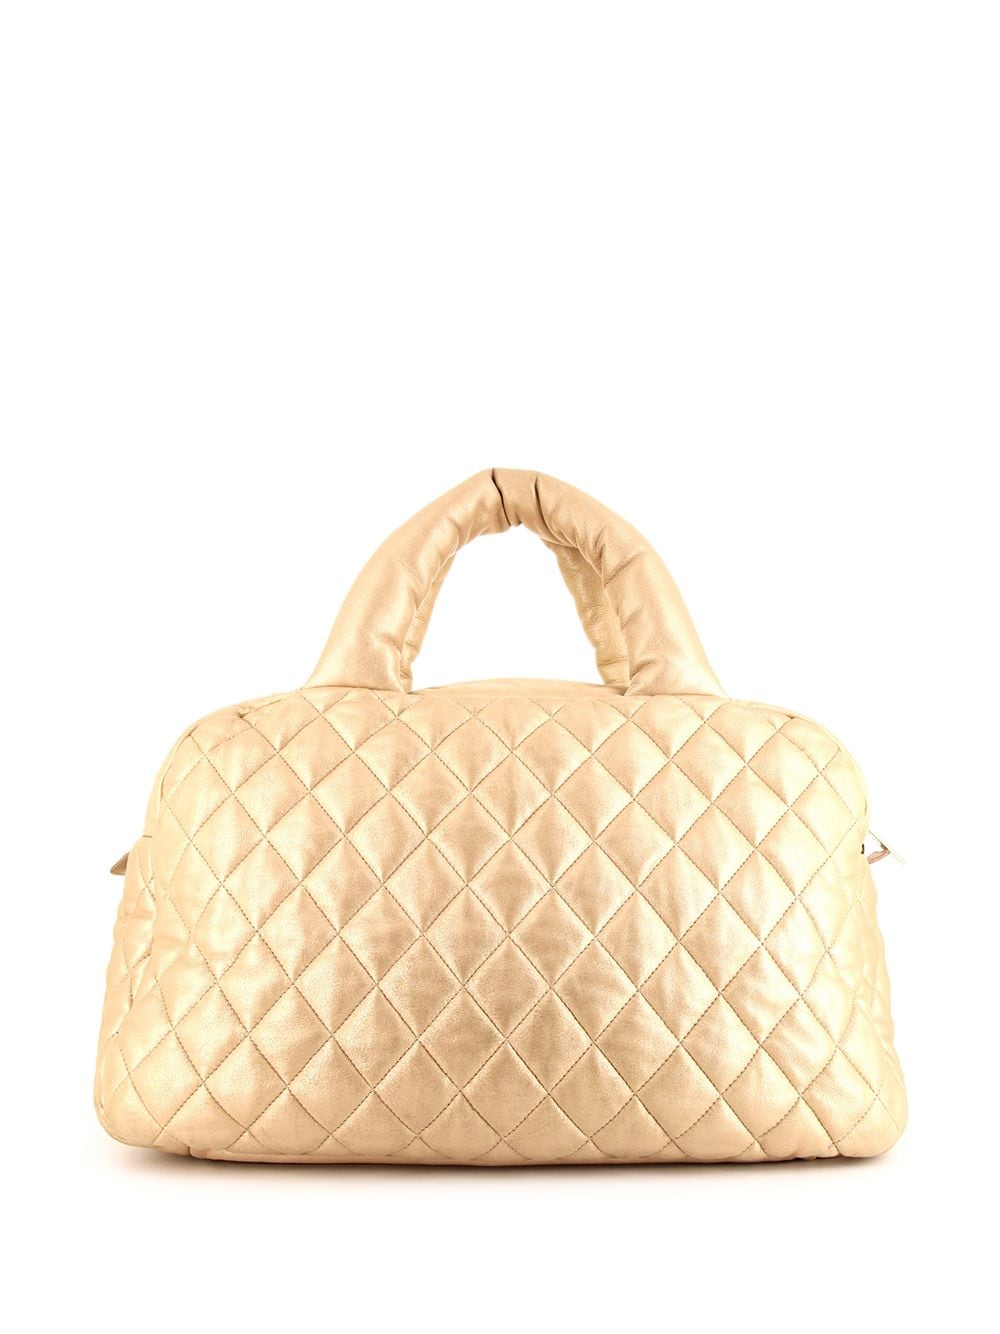 Chanel F/w 2009 Coco Cocoon Reversible Tote Bag